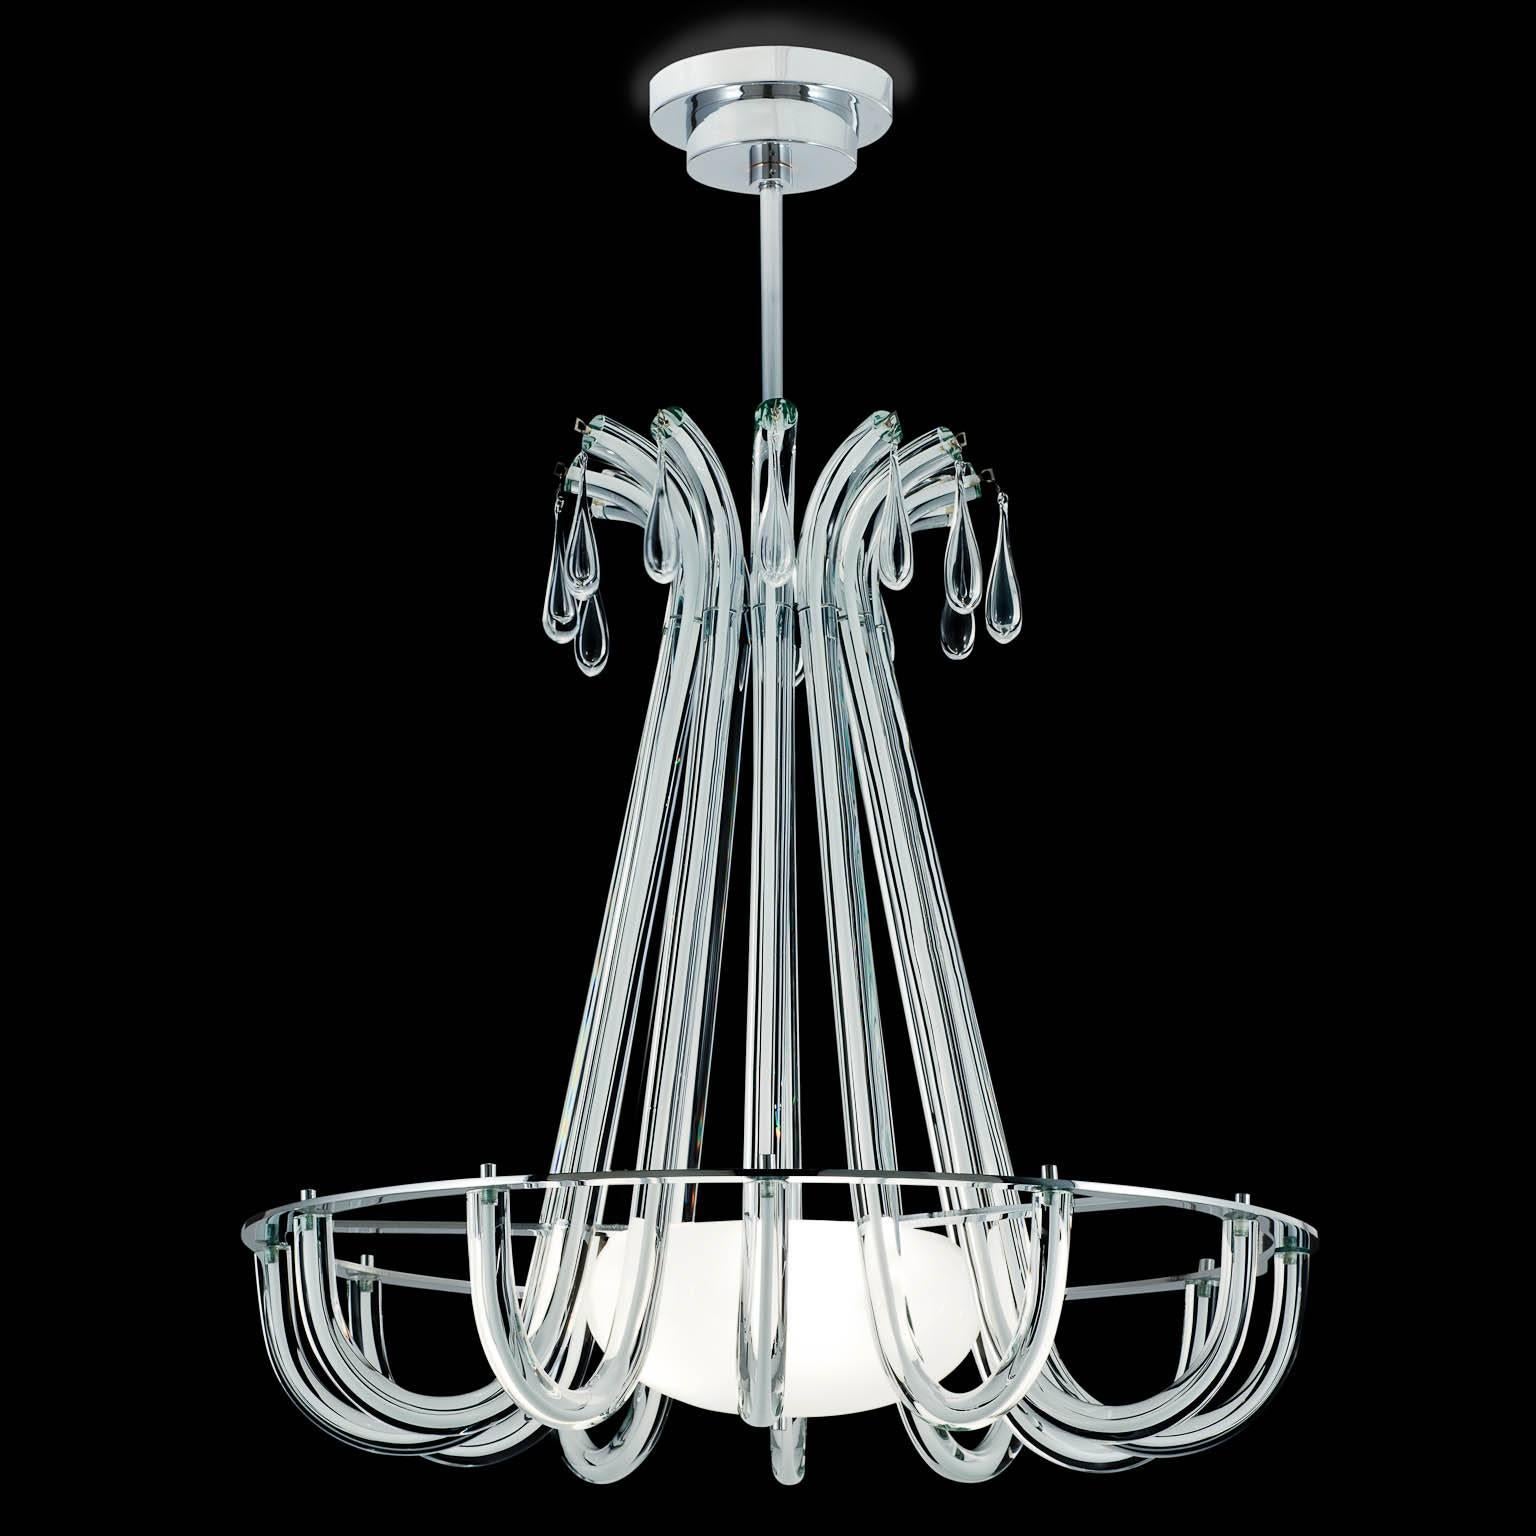 This item includes all taxes for delivery to the USA or the EU.
Leopoldo re-imagines a Classic chandelier form in a contemporary Silhouette. Clear cristallo rods with an inner lattimo white core rest upon a slender mirror polished frame. 
Size Ø